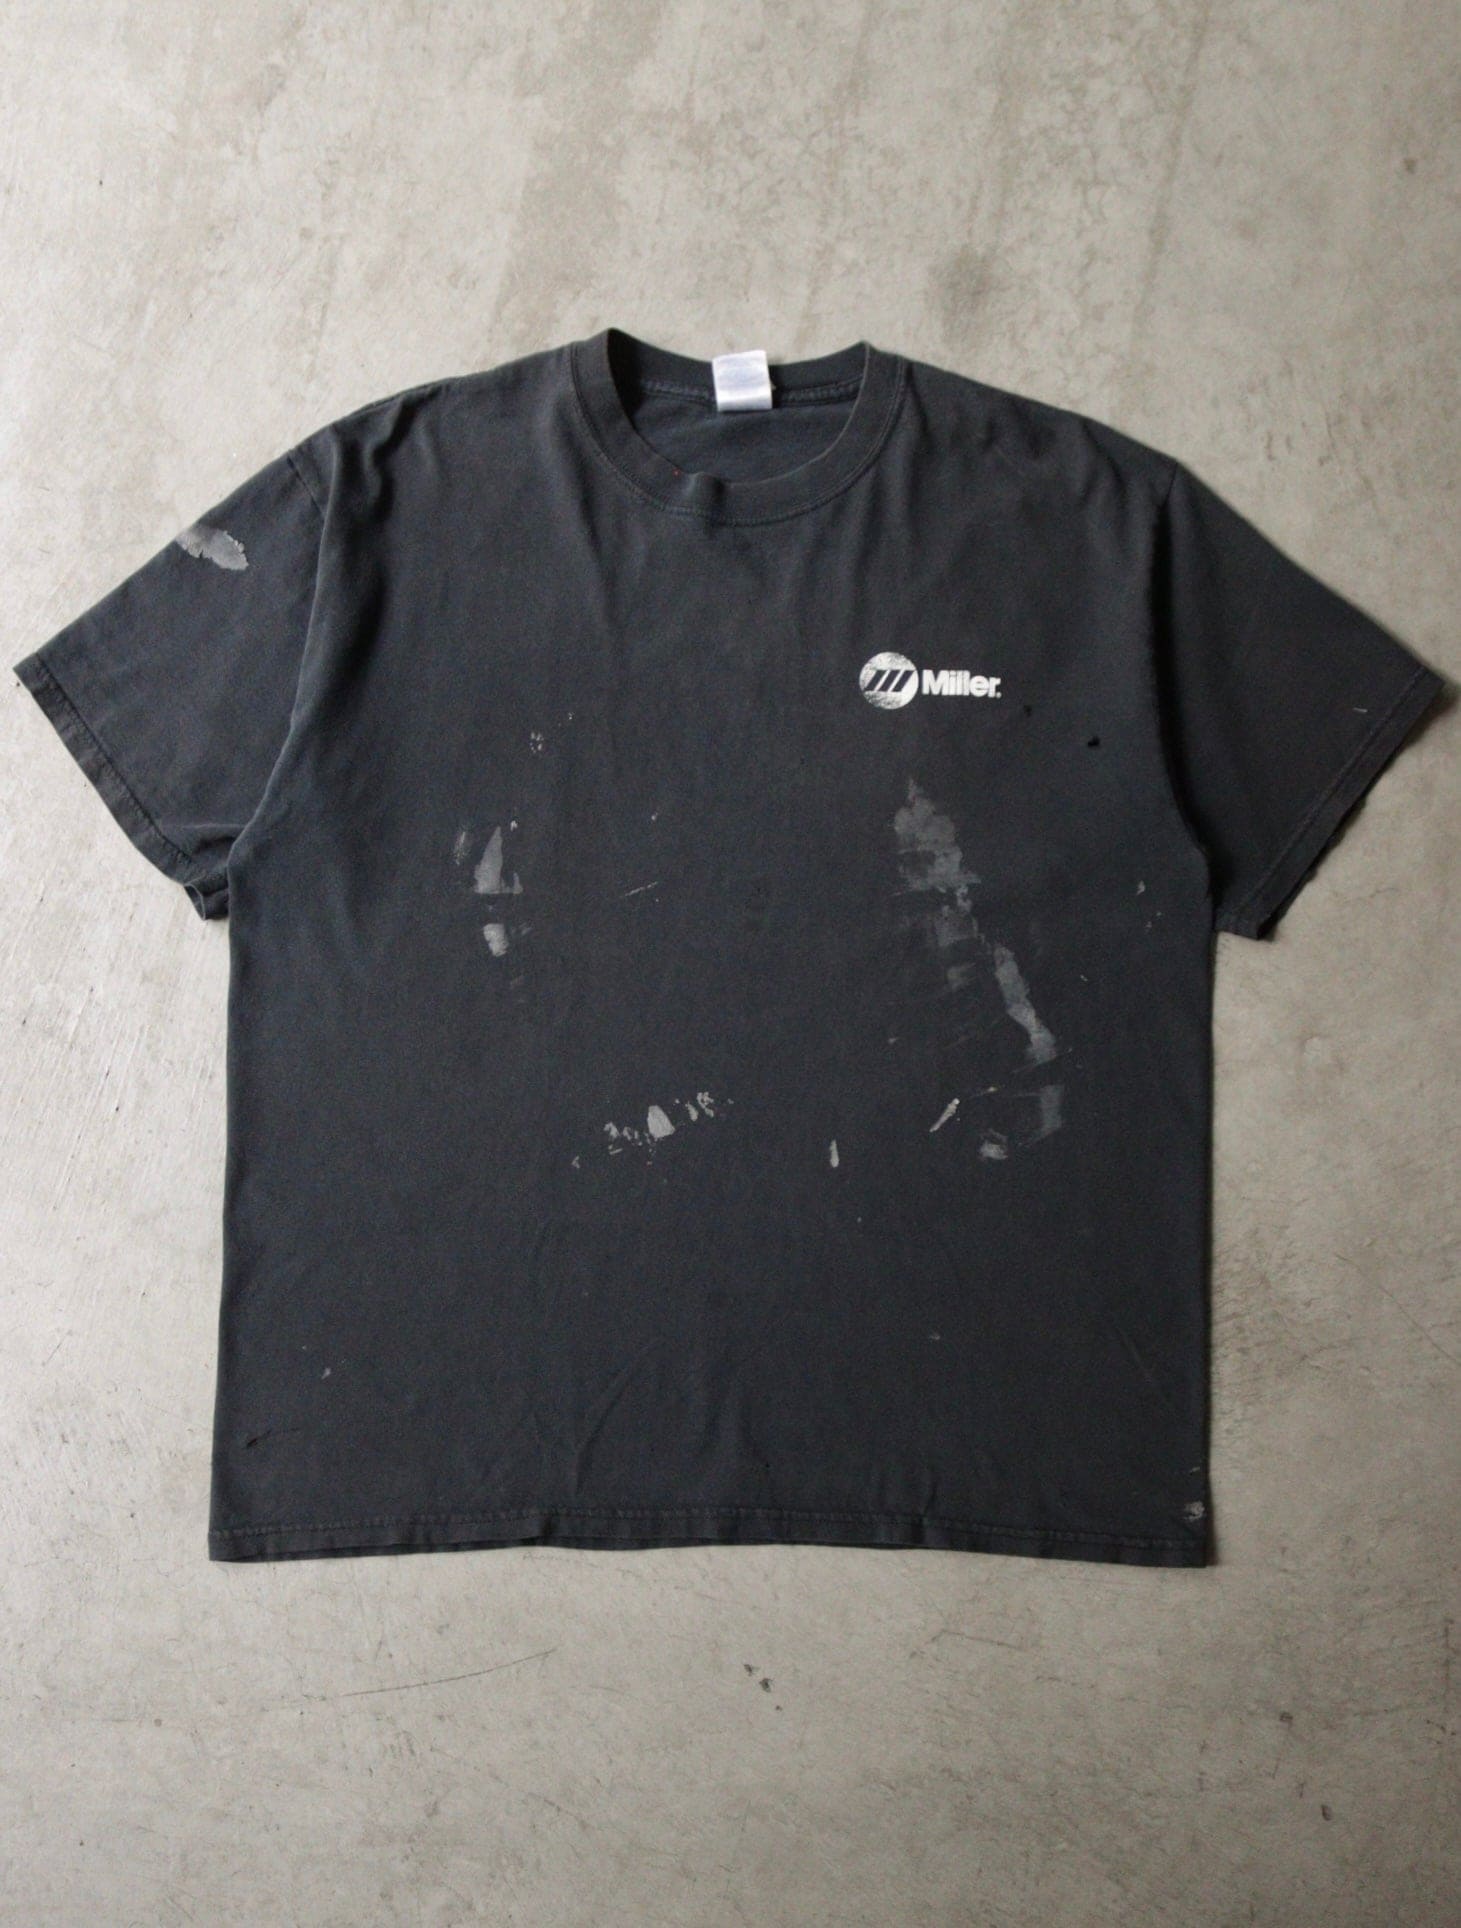 2000S THE CHOPPER PAINTED TEE